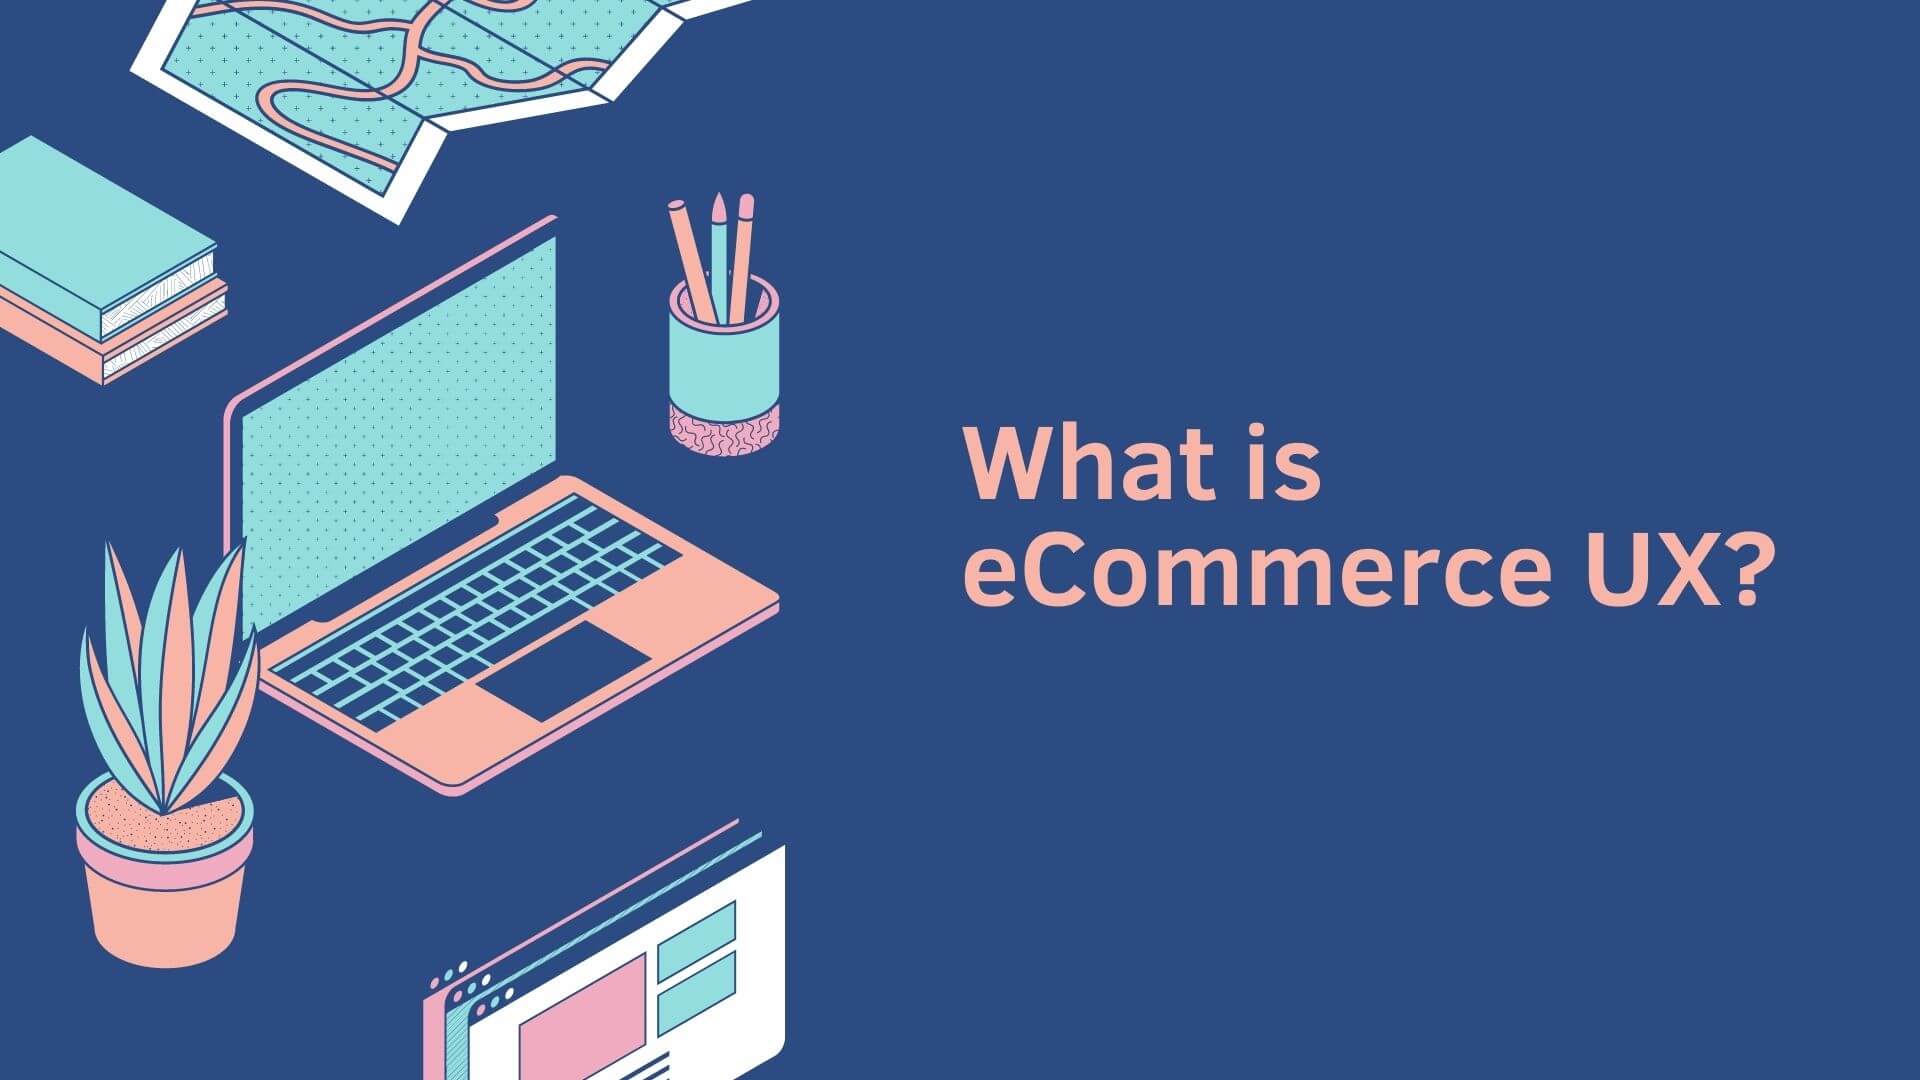 What is eCommerce UX